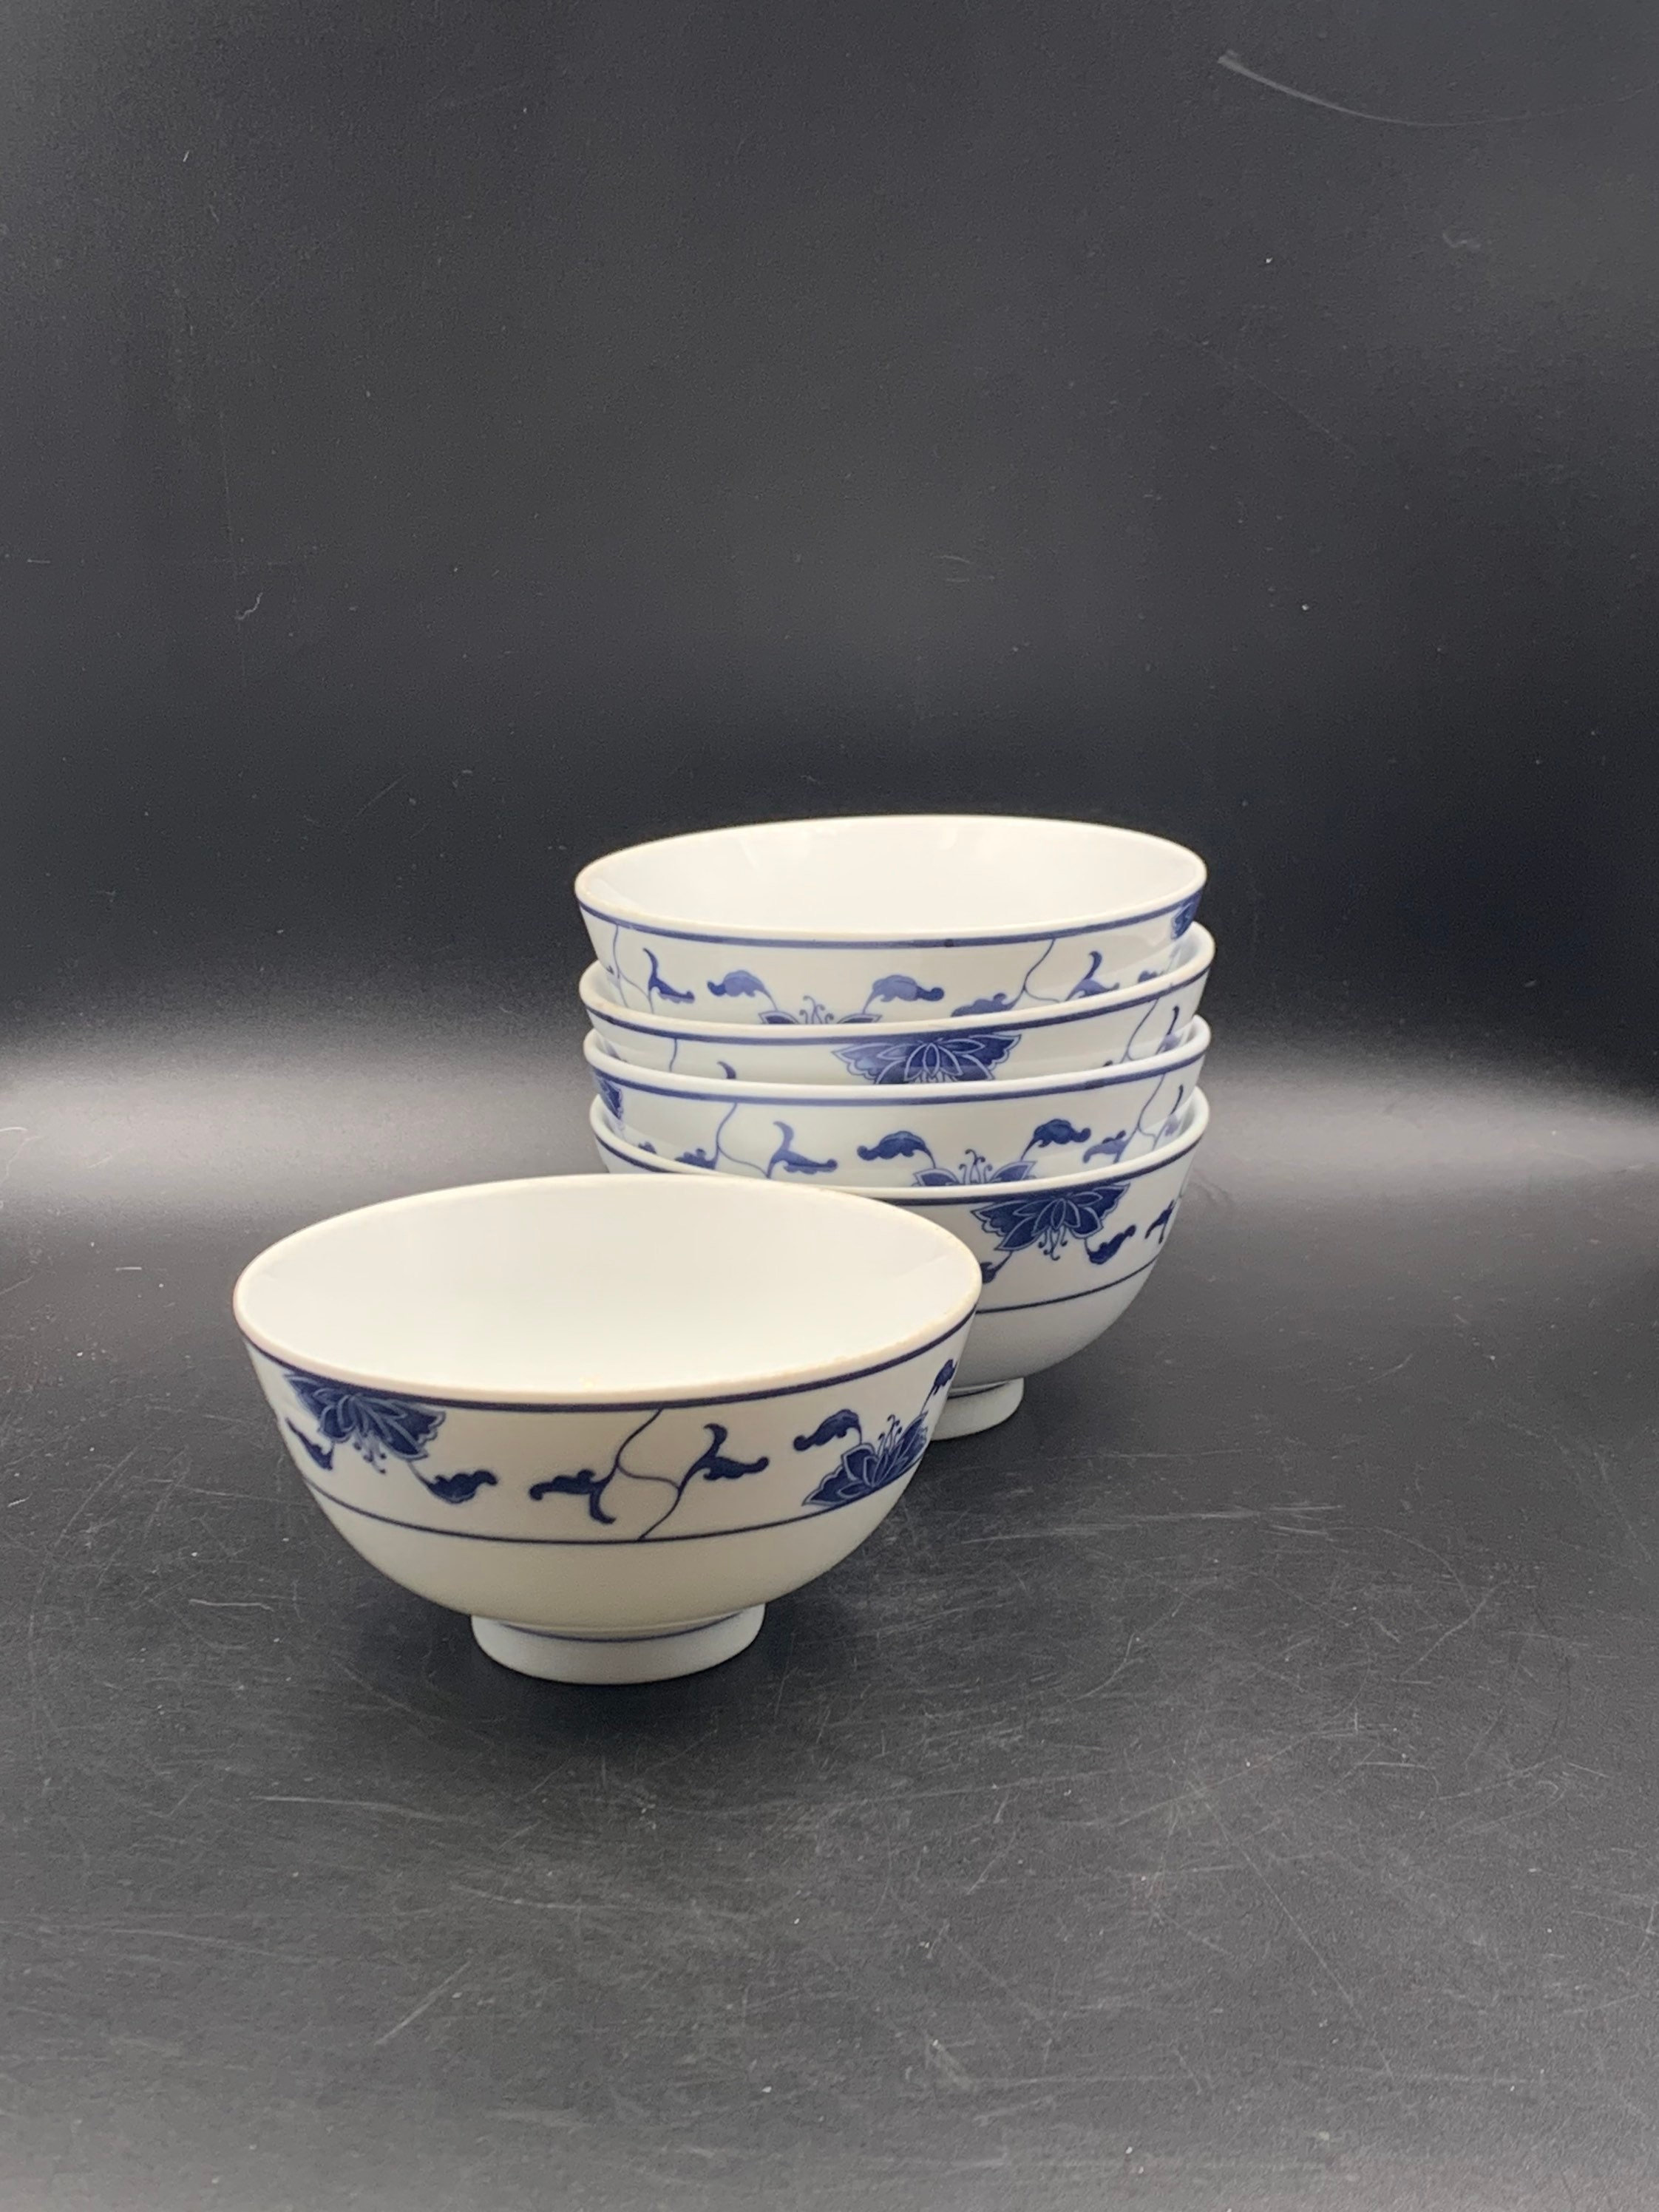 4.5inch Chinese Ceramic Rice Bowls 10 oz for Cereal Soup Salad Pasta set of 10 White and Blue Porcelain Fine Bone China Jingdezhen 